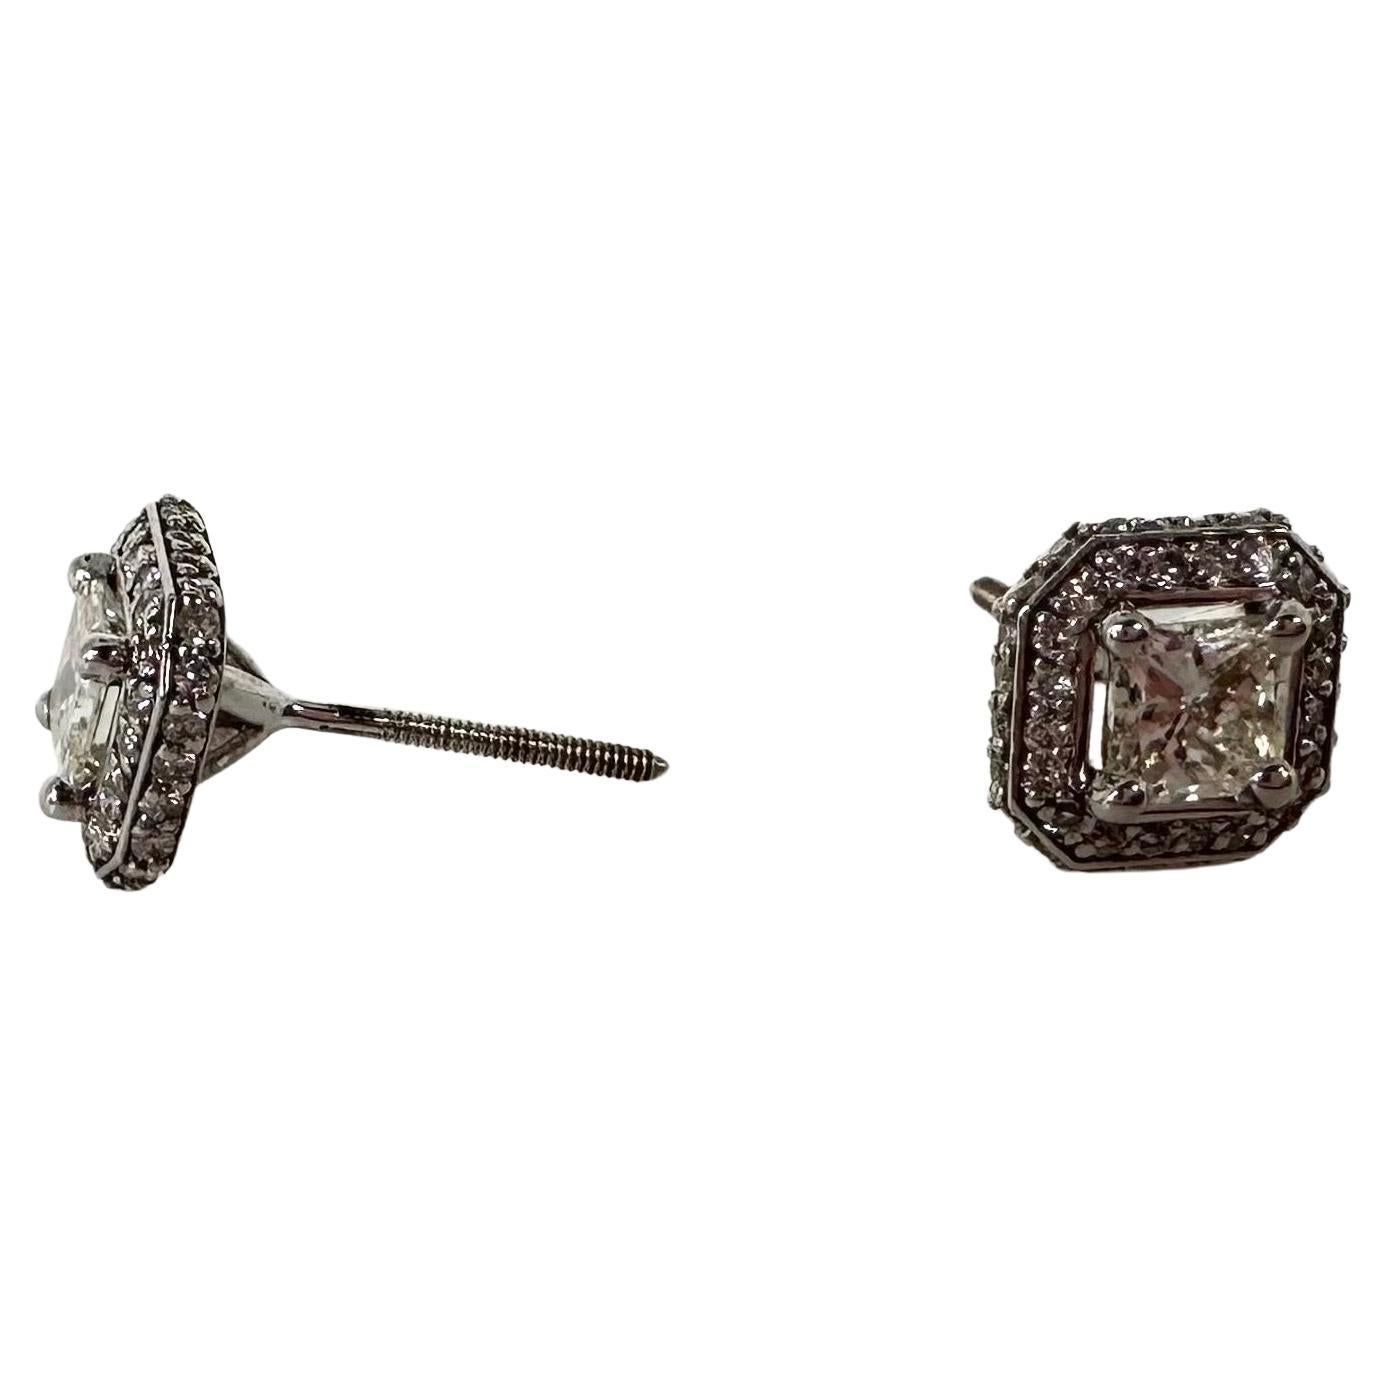 Royal stud earrings in 14KT white gold, stunning sparkle and the right size for everyday wear!

GOLD: 14KT gold
NATURAL DIAMOND(S)
Clarity/Color: VS-SI/F-G
Carat:1.26ct (total diamond weight for both)
Center: 1ct total weight ccenter stones, 0.26ct